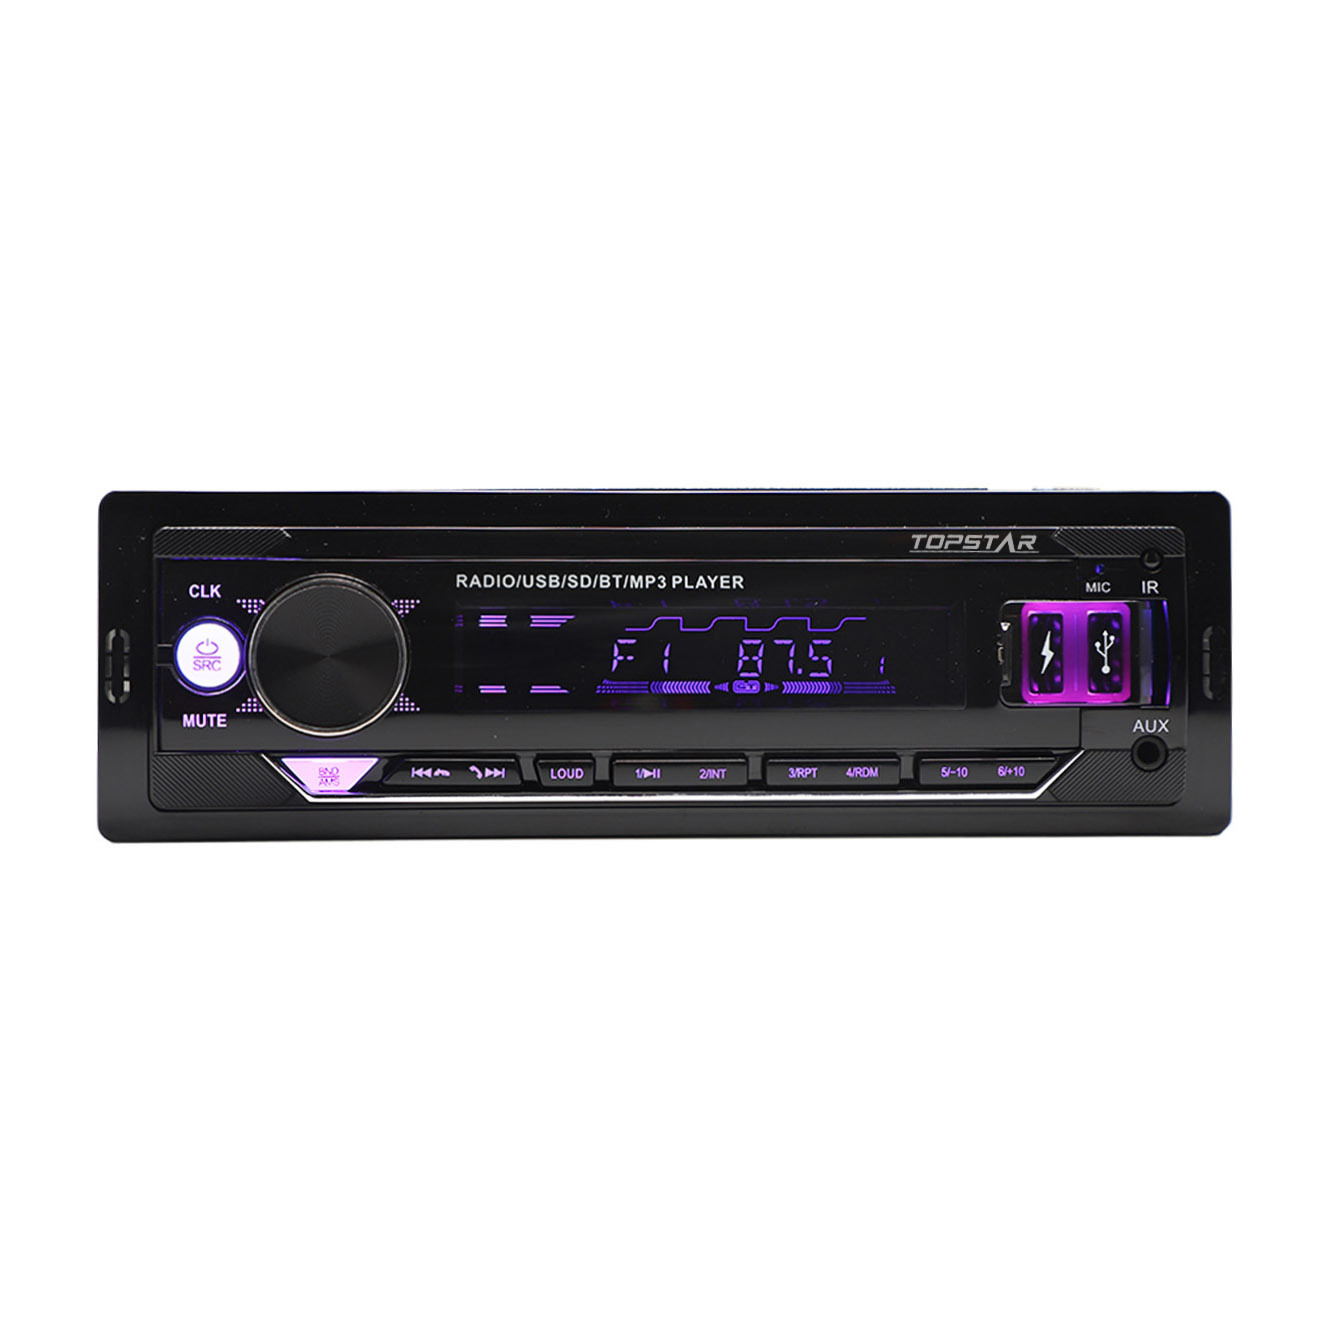 Accessory for Car Car Electronics Car Radio Fixed Panel Player Car Stereo Car Video Multi Color Car MP3 Player